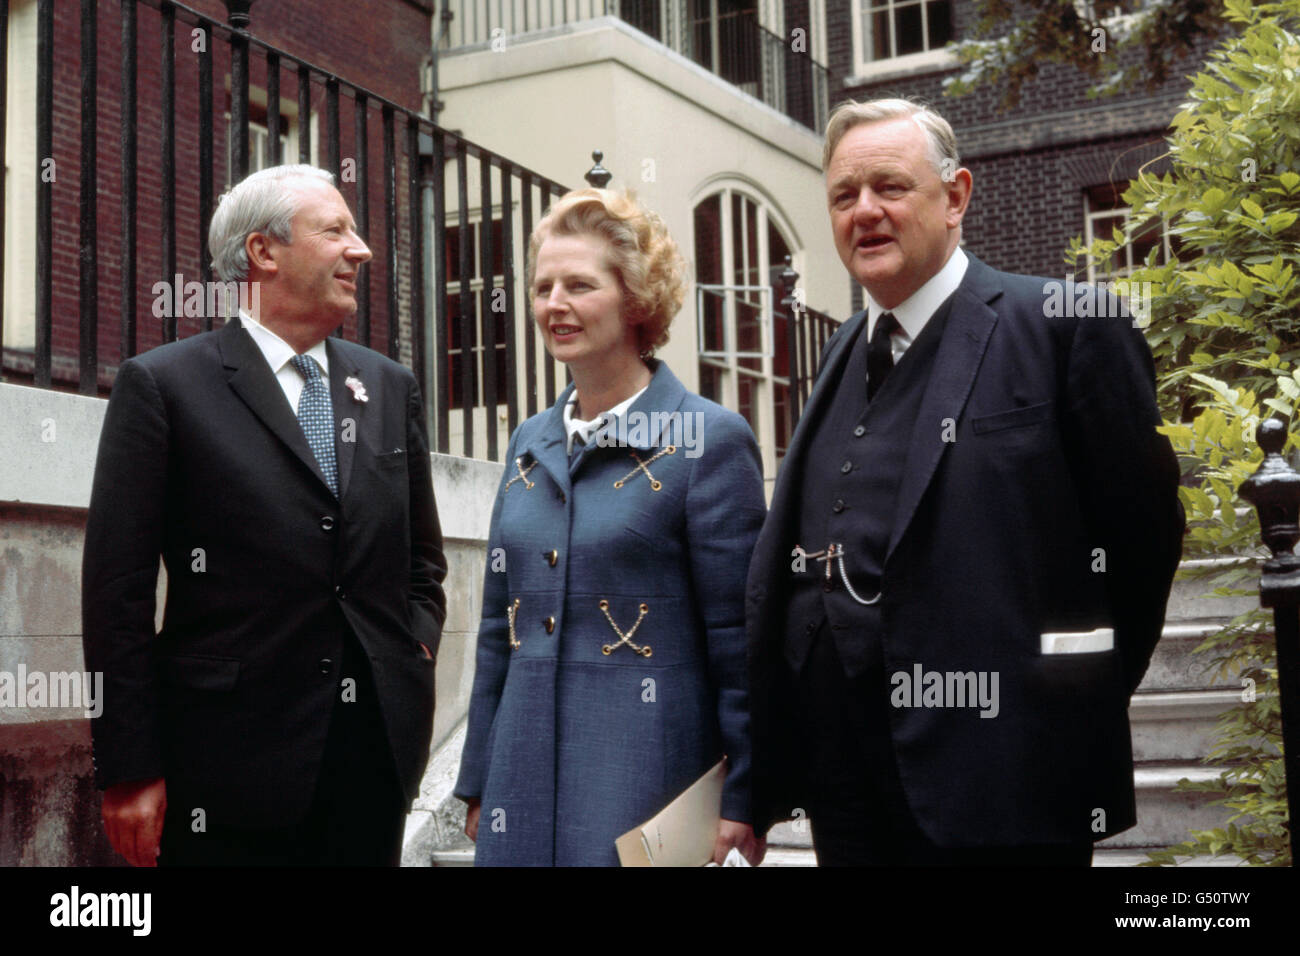 The new British Prime Minister Edward Heath, left, with Margaret Thatcher, Secretary for Education and Science, and Quentin Hogg, the Lord Chancellor, in the garden of No 10 Downing Street, London. Stock Photo